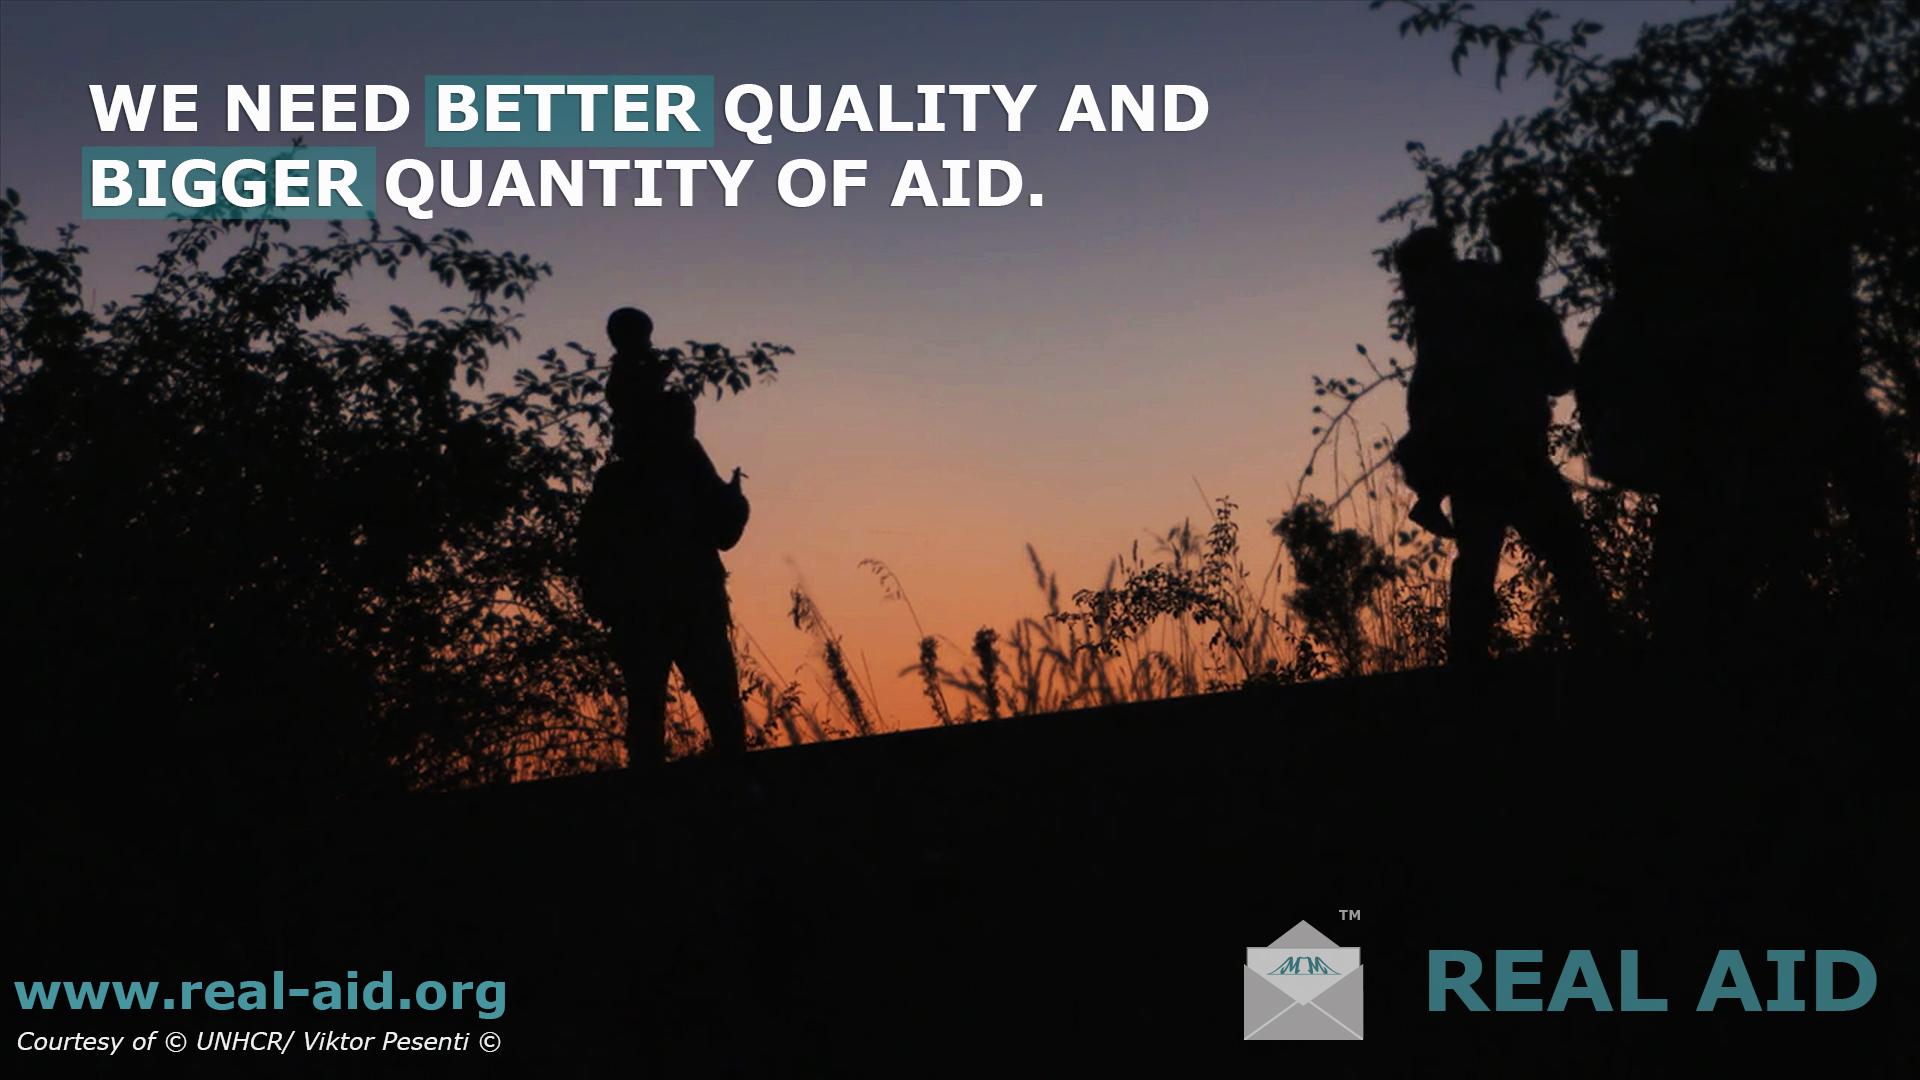 Real Aid poster, "we need better quality and bigger quantity of aid" text, image of figures silhouetted against sunset